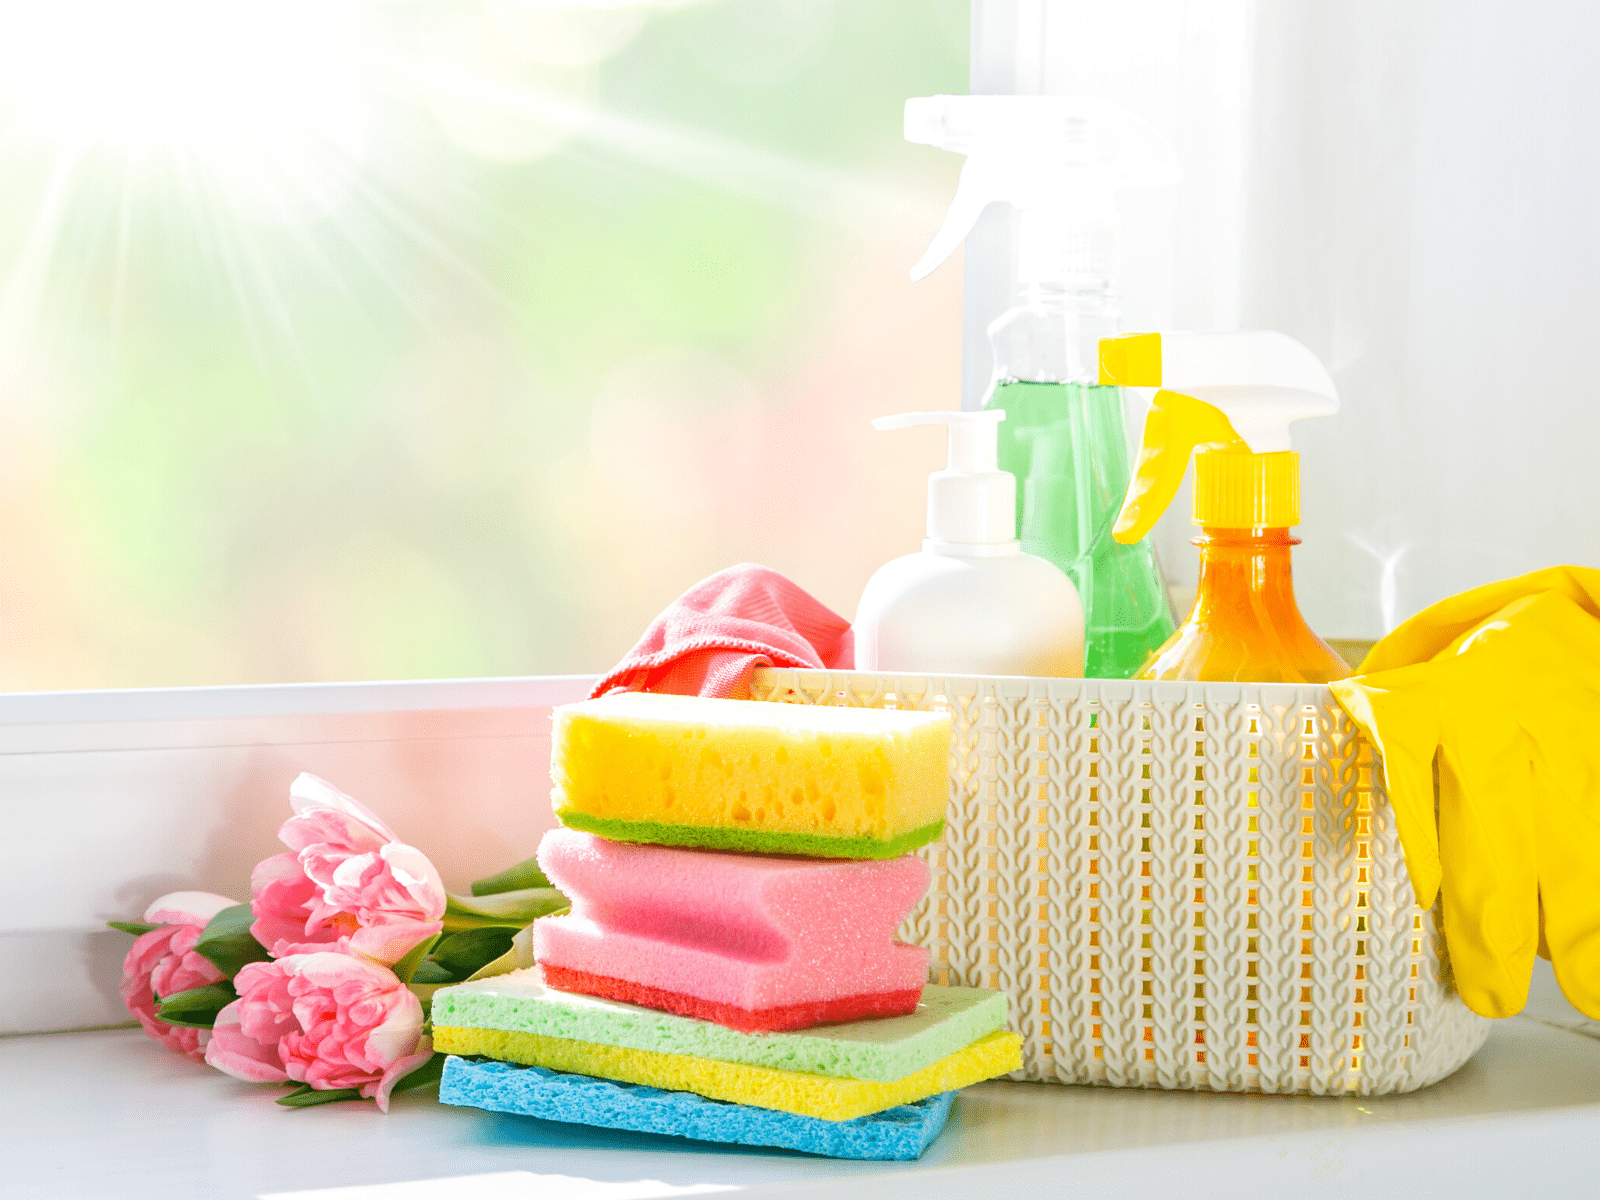 Spring cleaning sponges, cleaning products and basket.